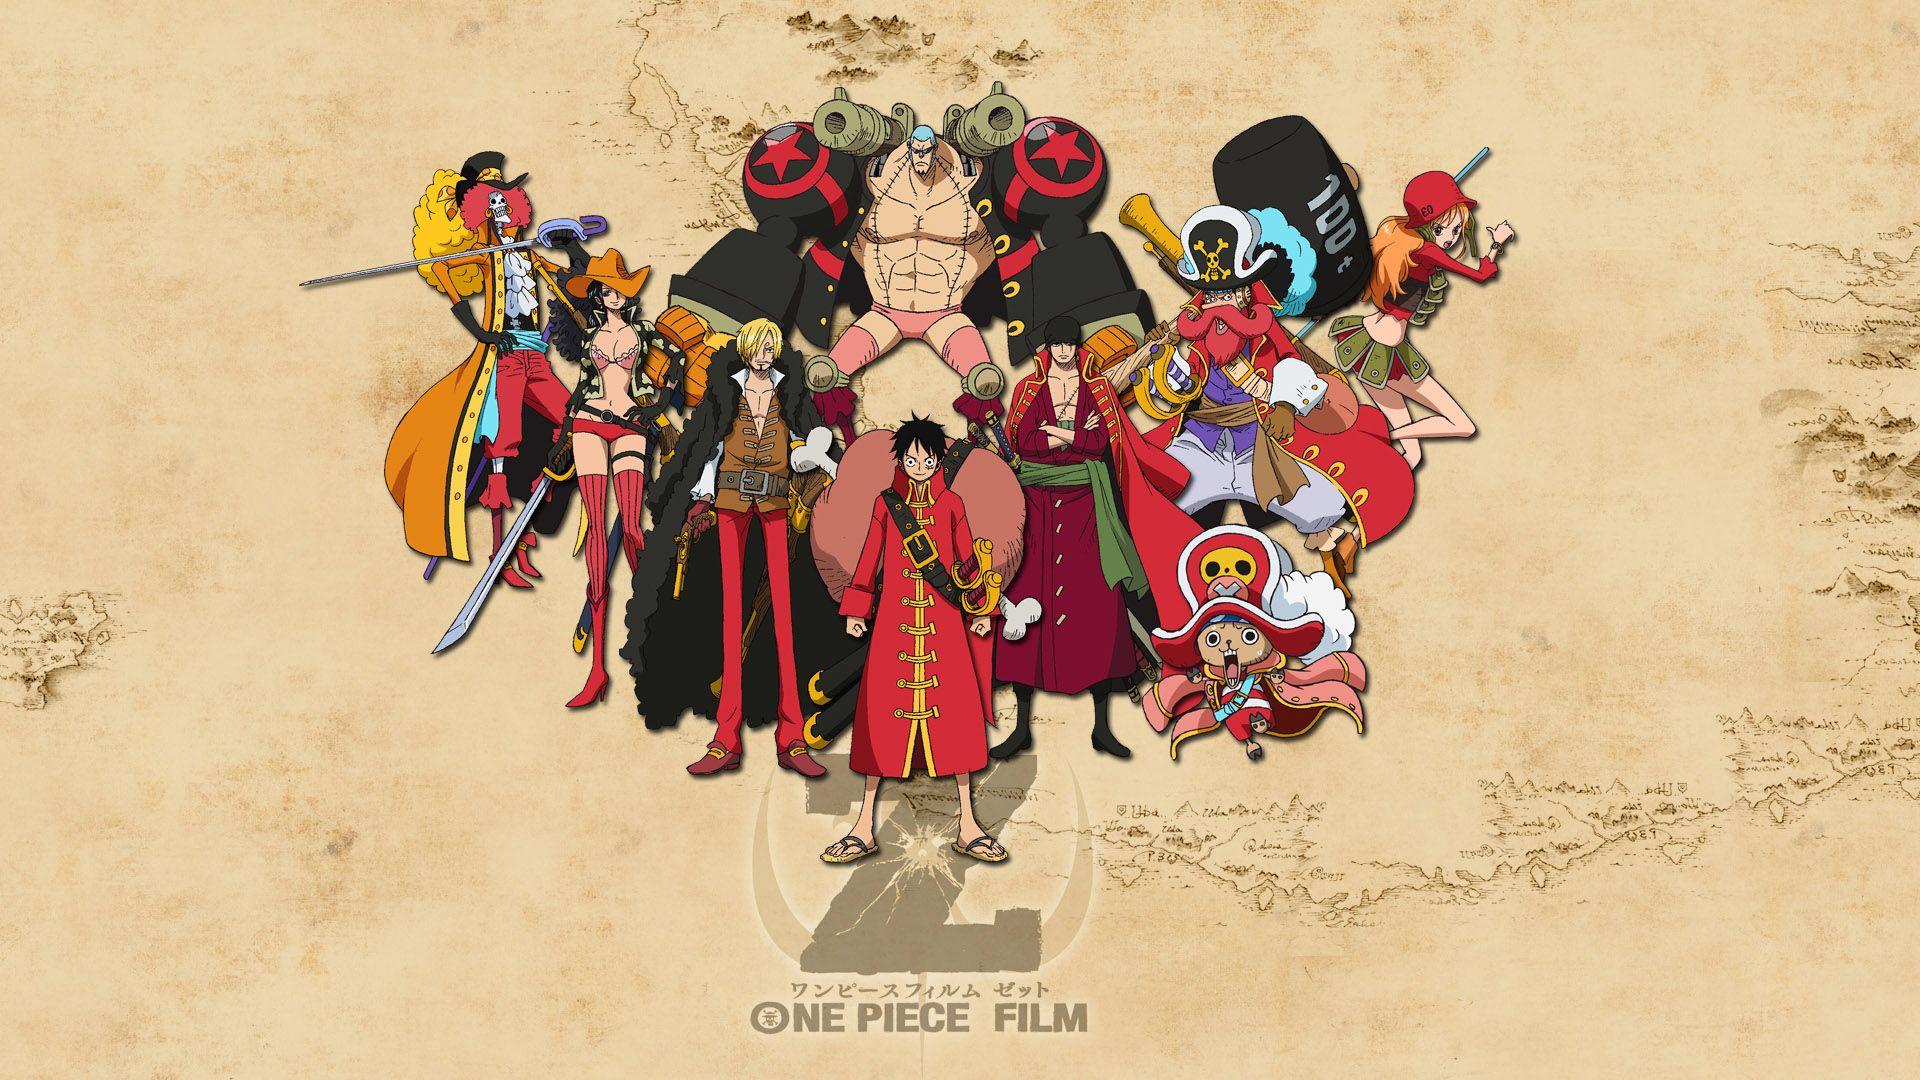 One Piece HD Wallpaper Image Full Background Of PC